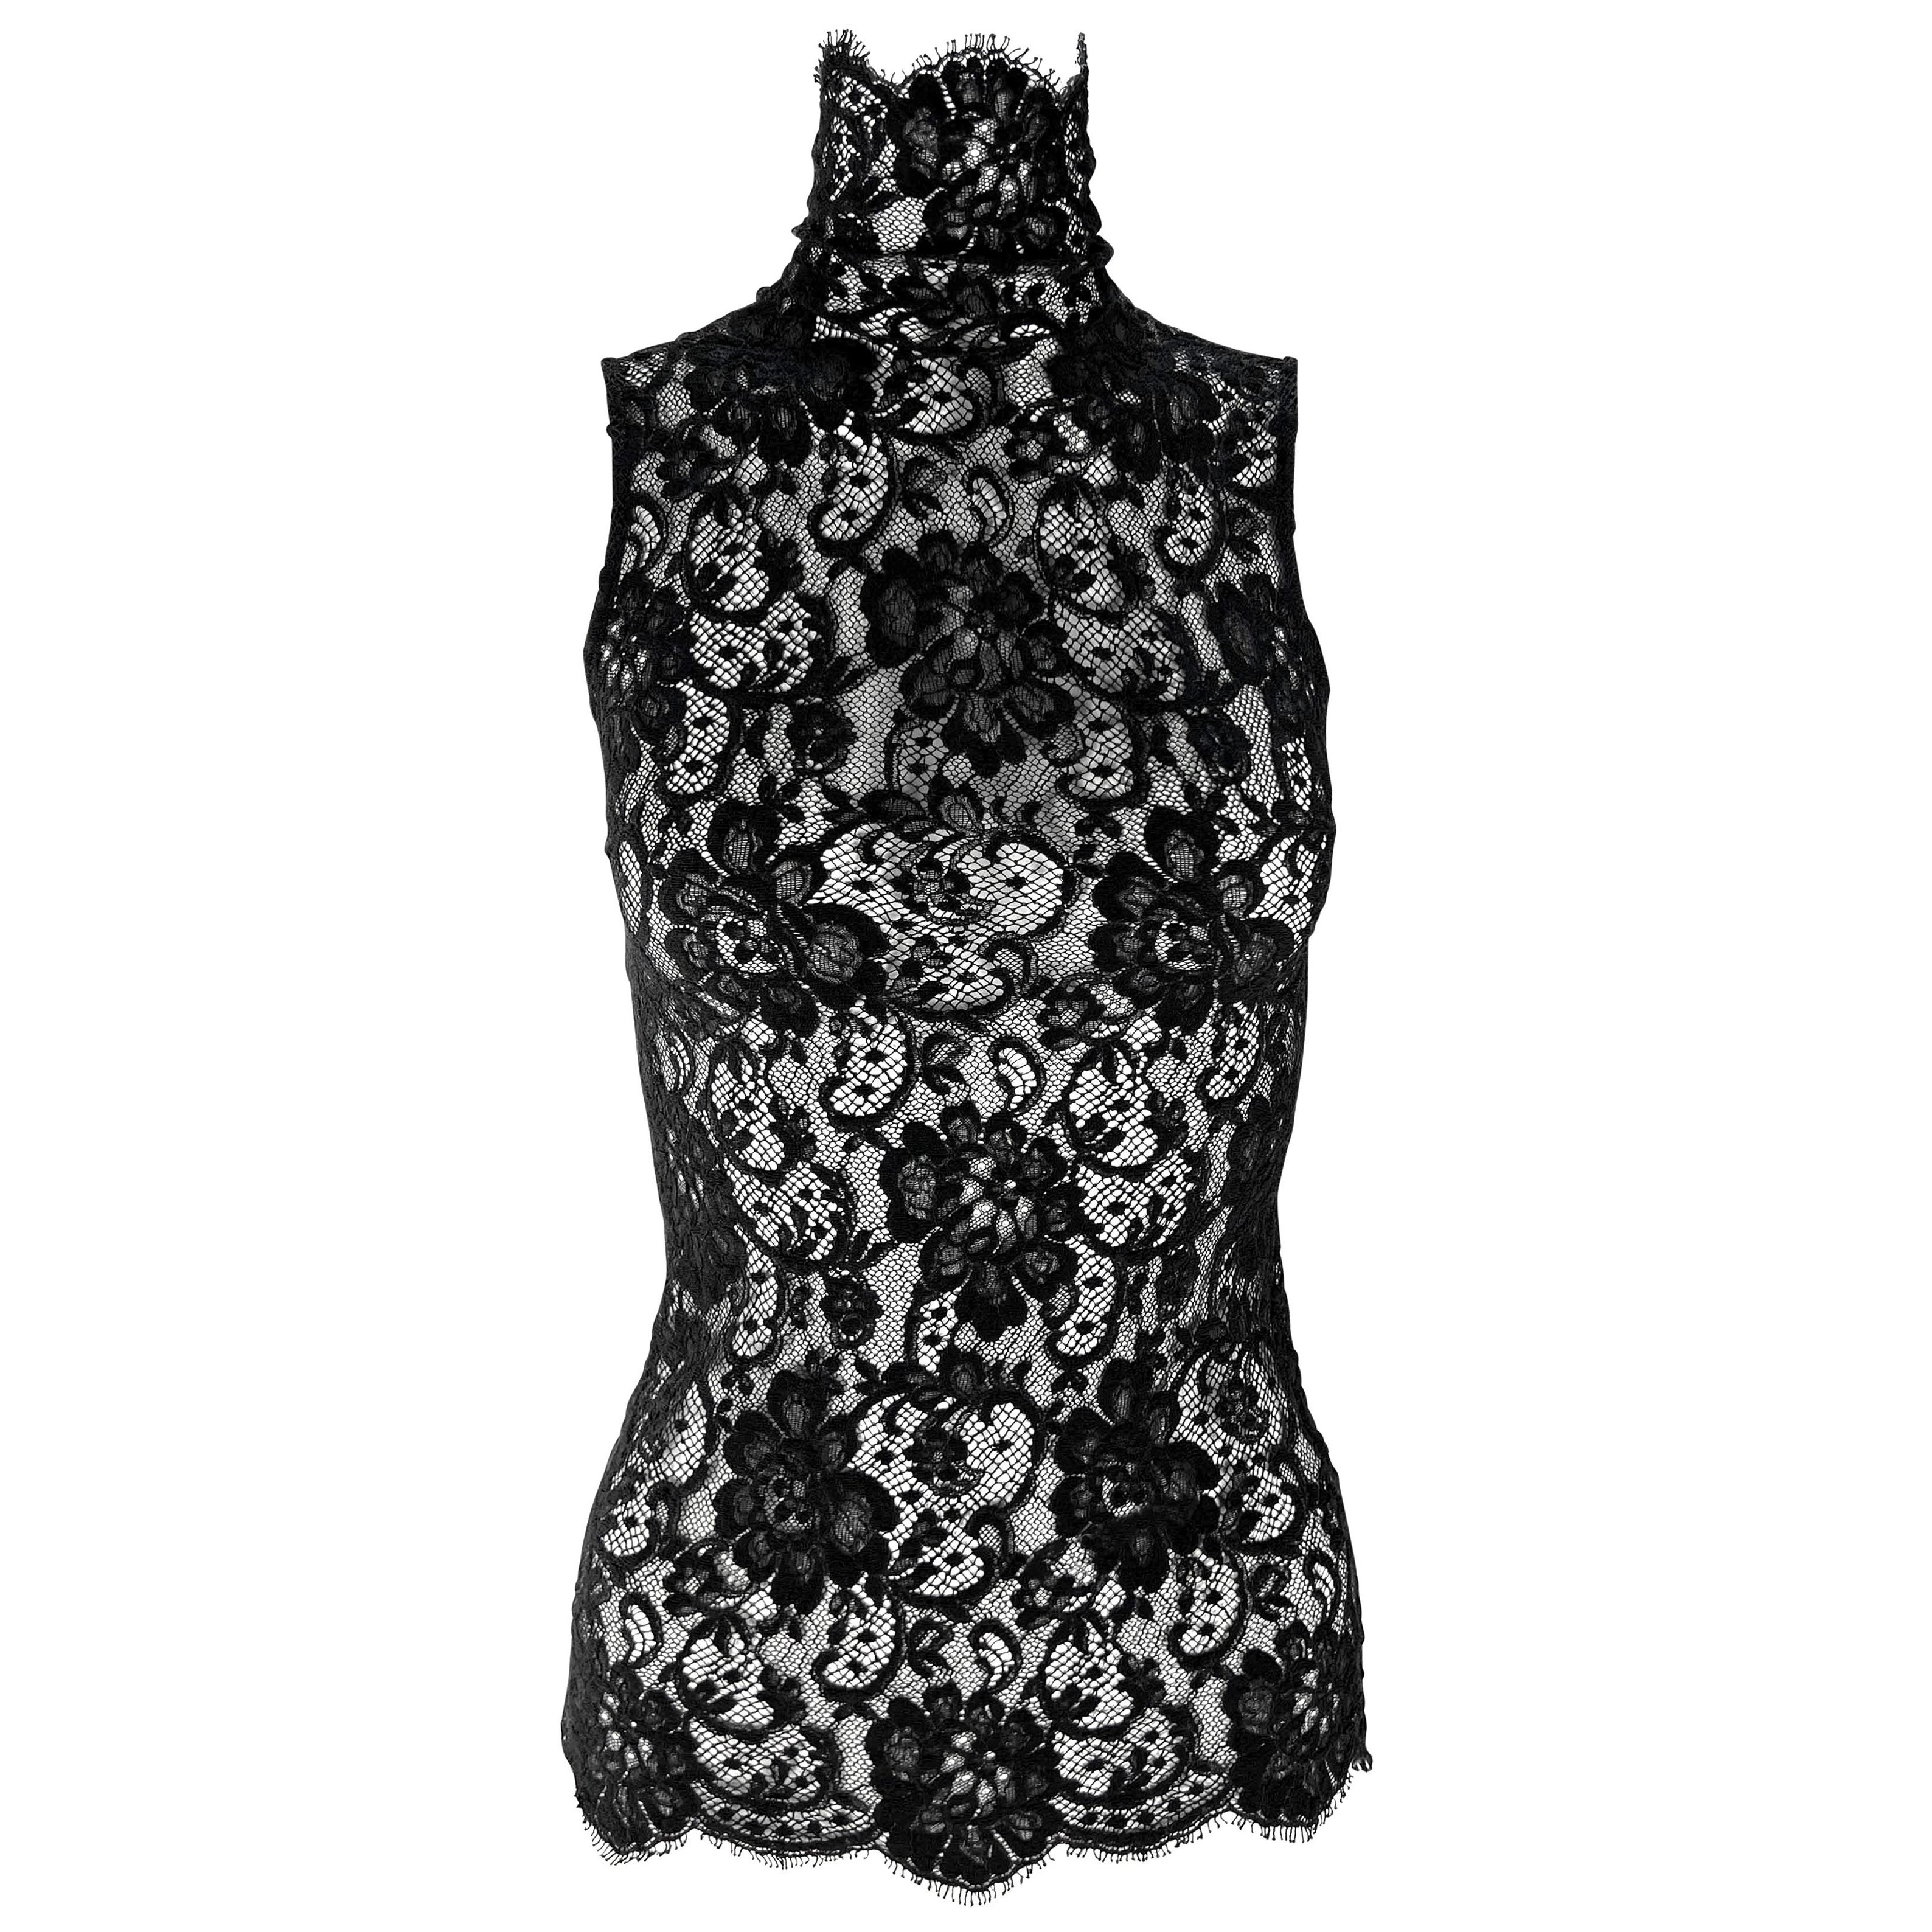 F/W 2002 Dolce & Gabbana Sheer Lace Black Mock Neck Sleeveless Top For Sale